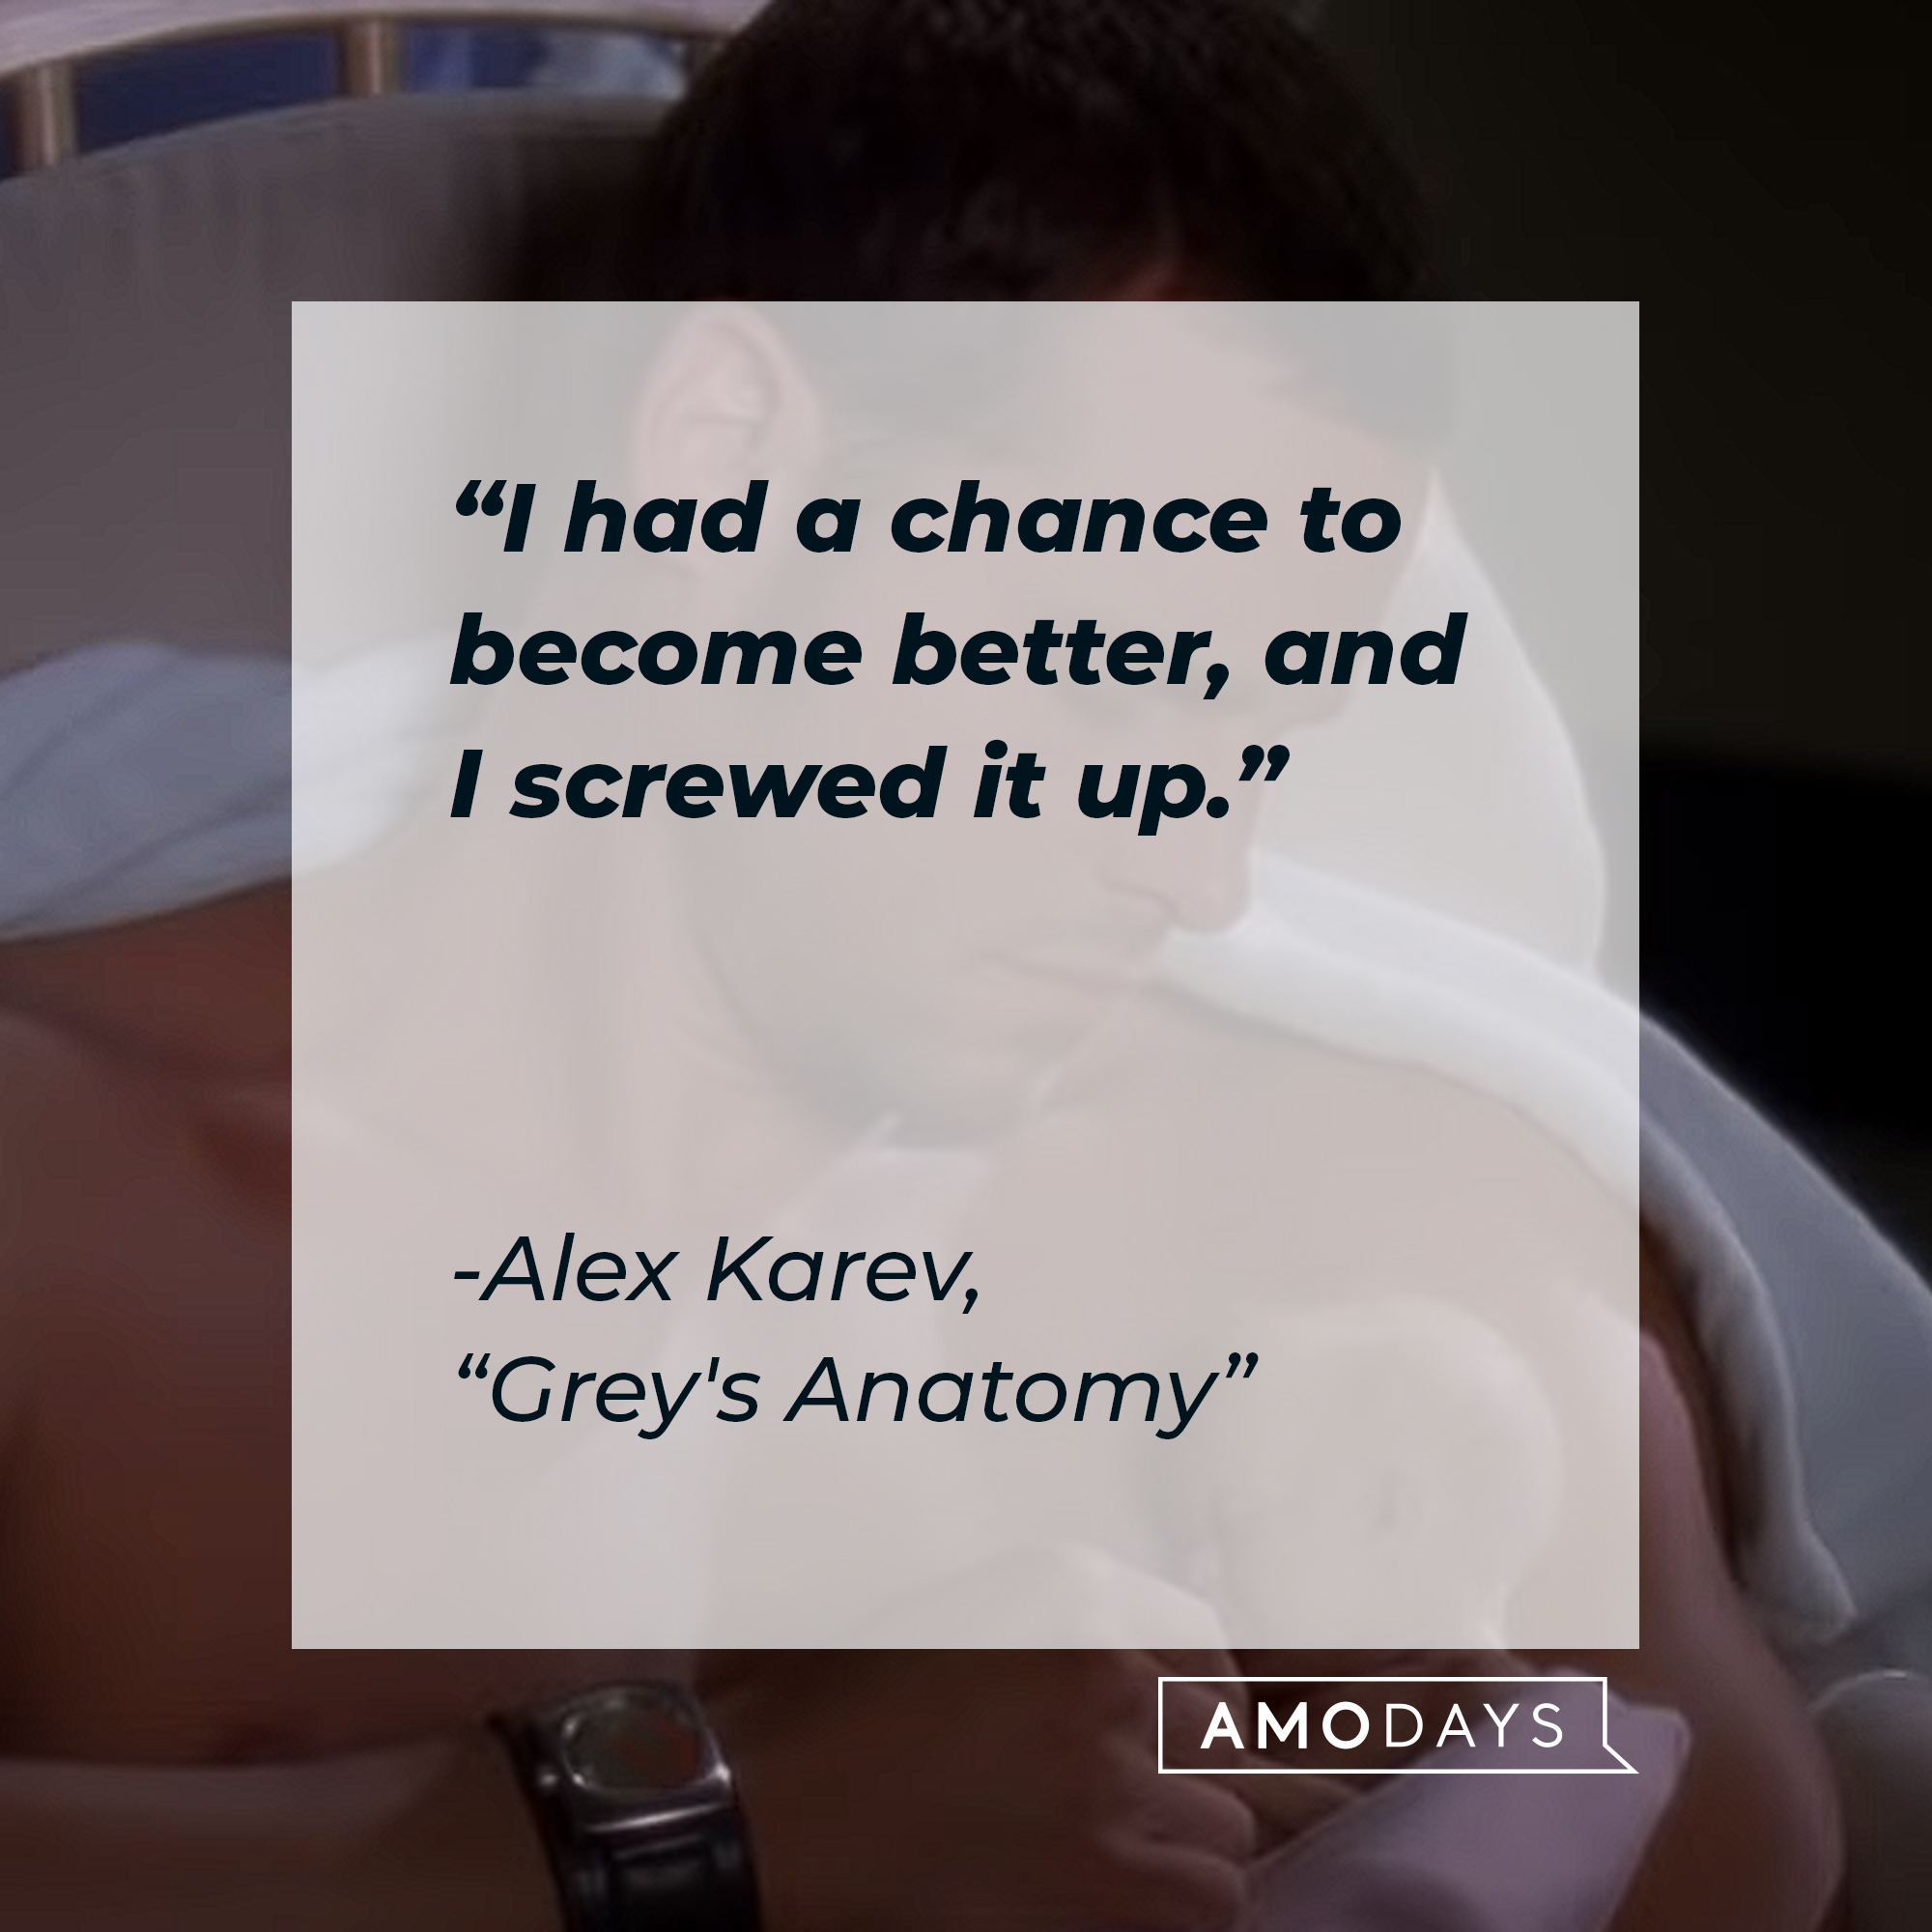 Alex Karev’s quote from “Grey’s Anatomy”: “I had a chance to become better, and I screwed it up.” | Source: youtube.com/ABCNetwork